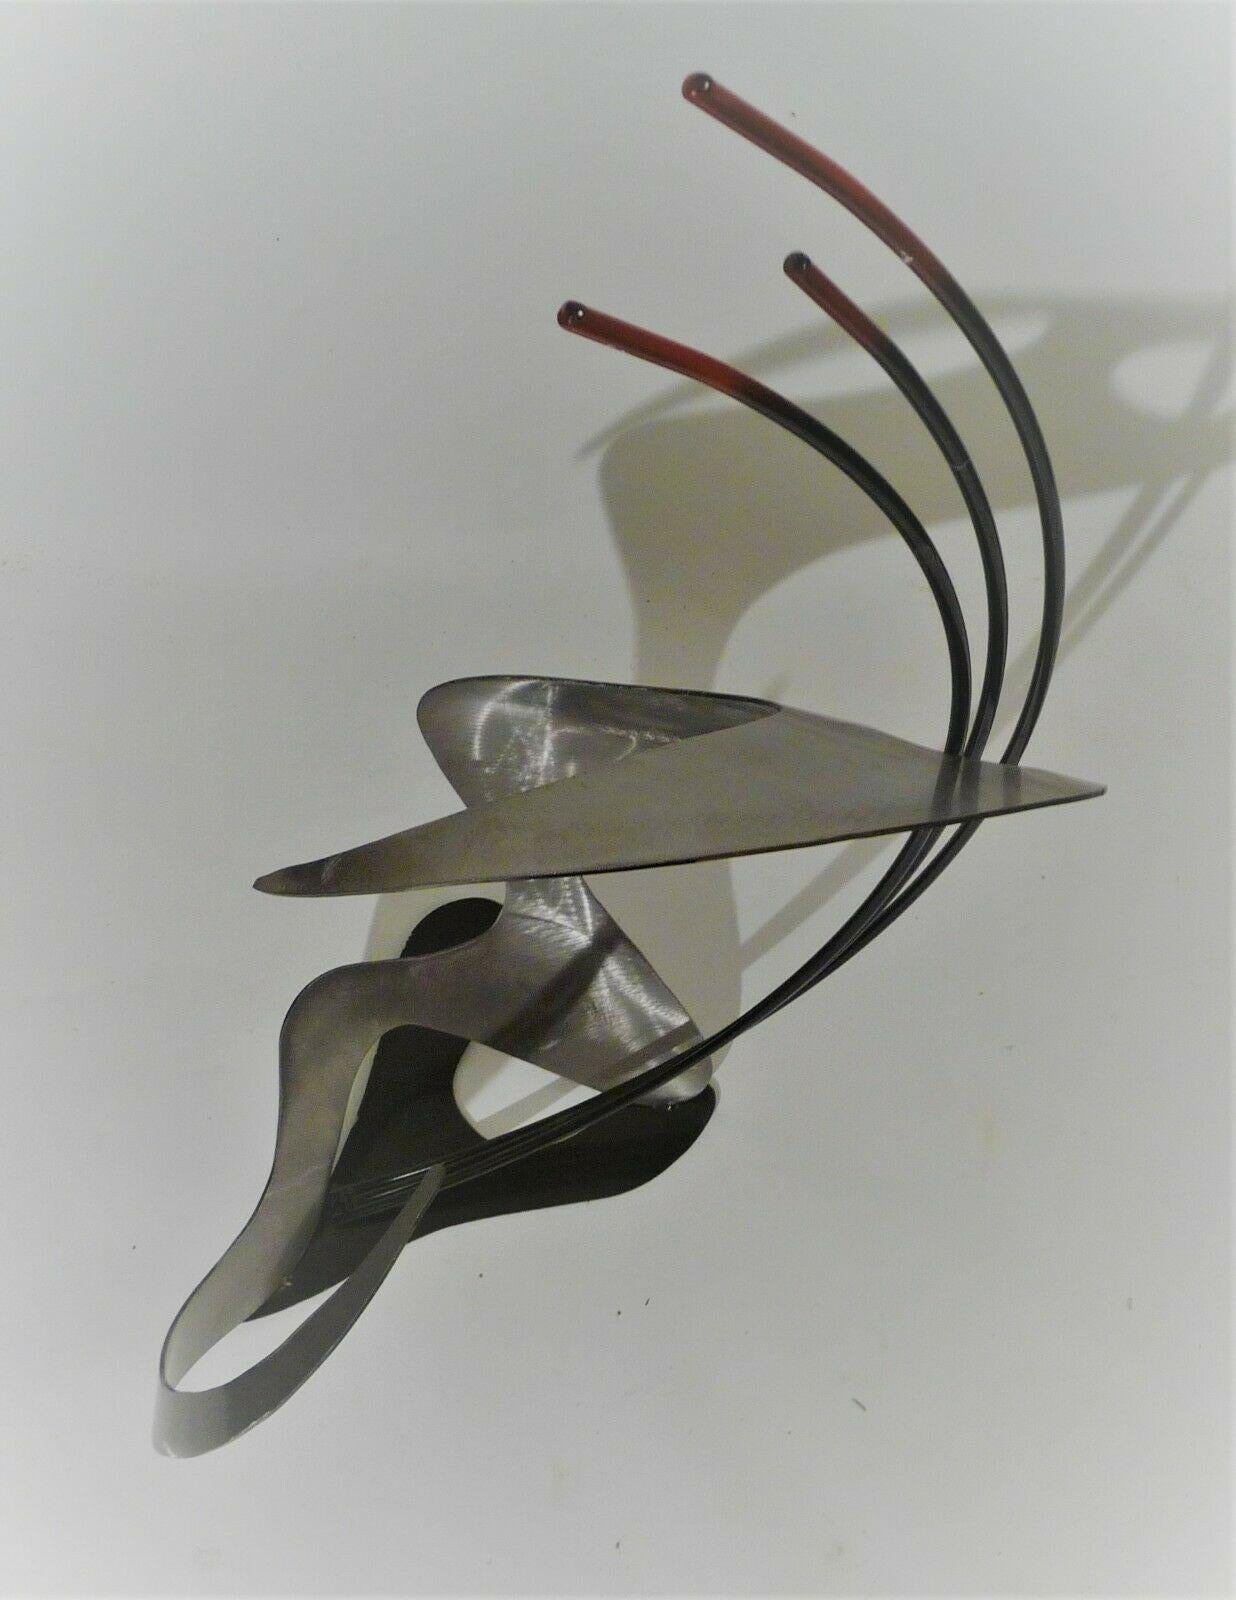 This is an original curtis jere Mid-Century Modern tabletop abstract metal sculpture. Signed on bottom. Features sweeping metal plate and rods in an upsweep design. Biomorphic metal base. Sophisticated abstract colorful design that changes every